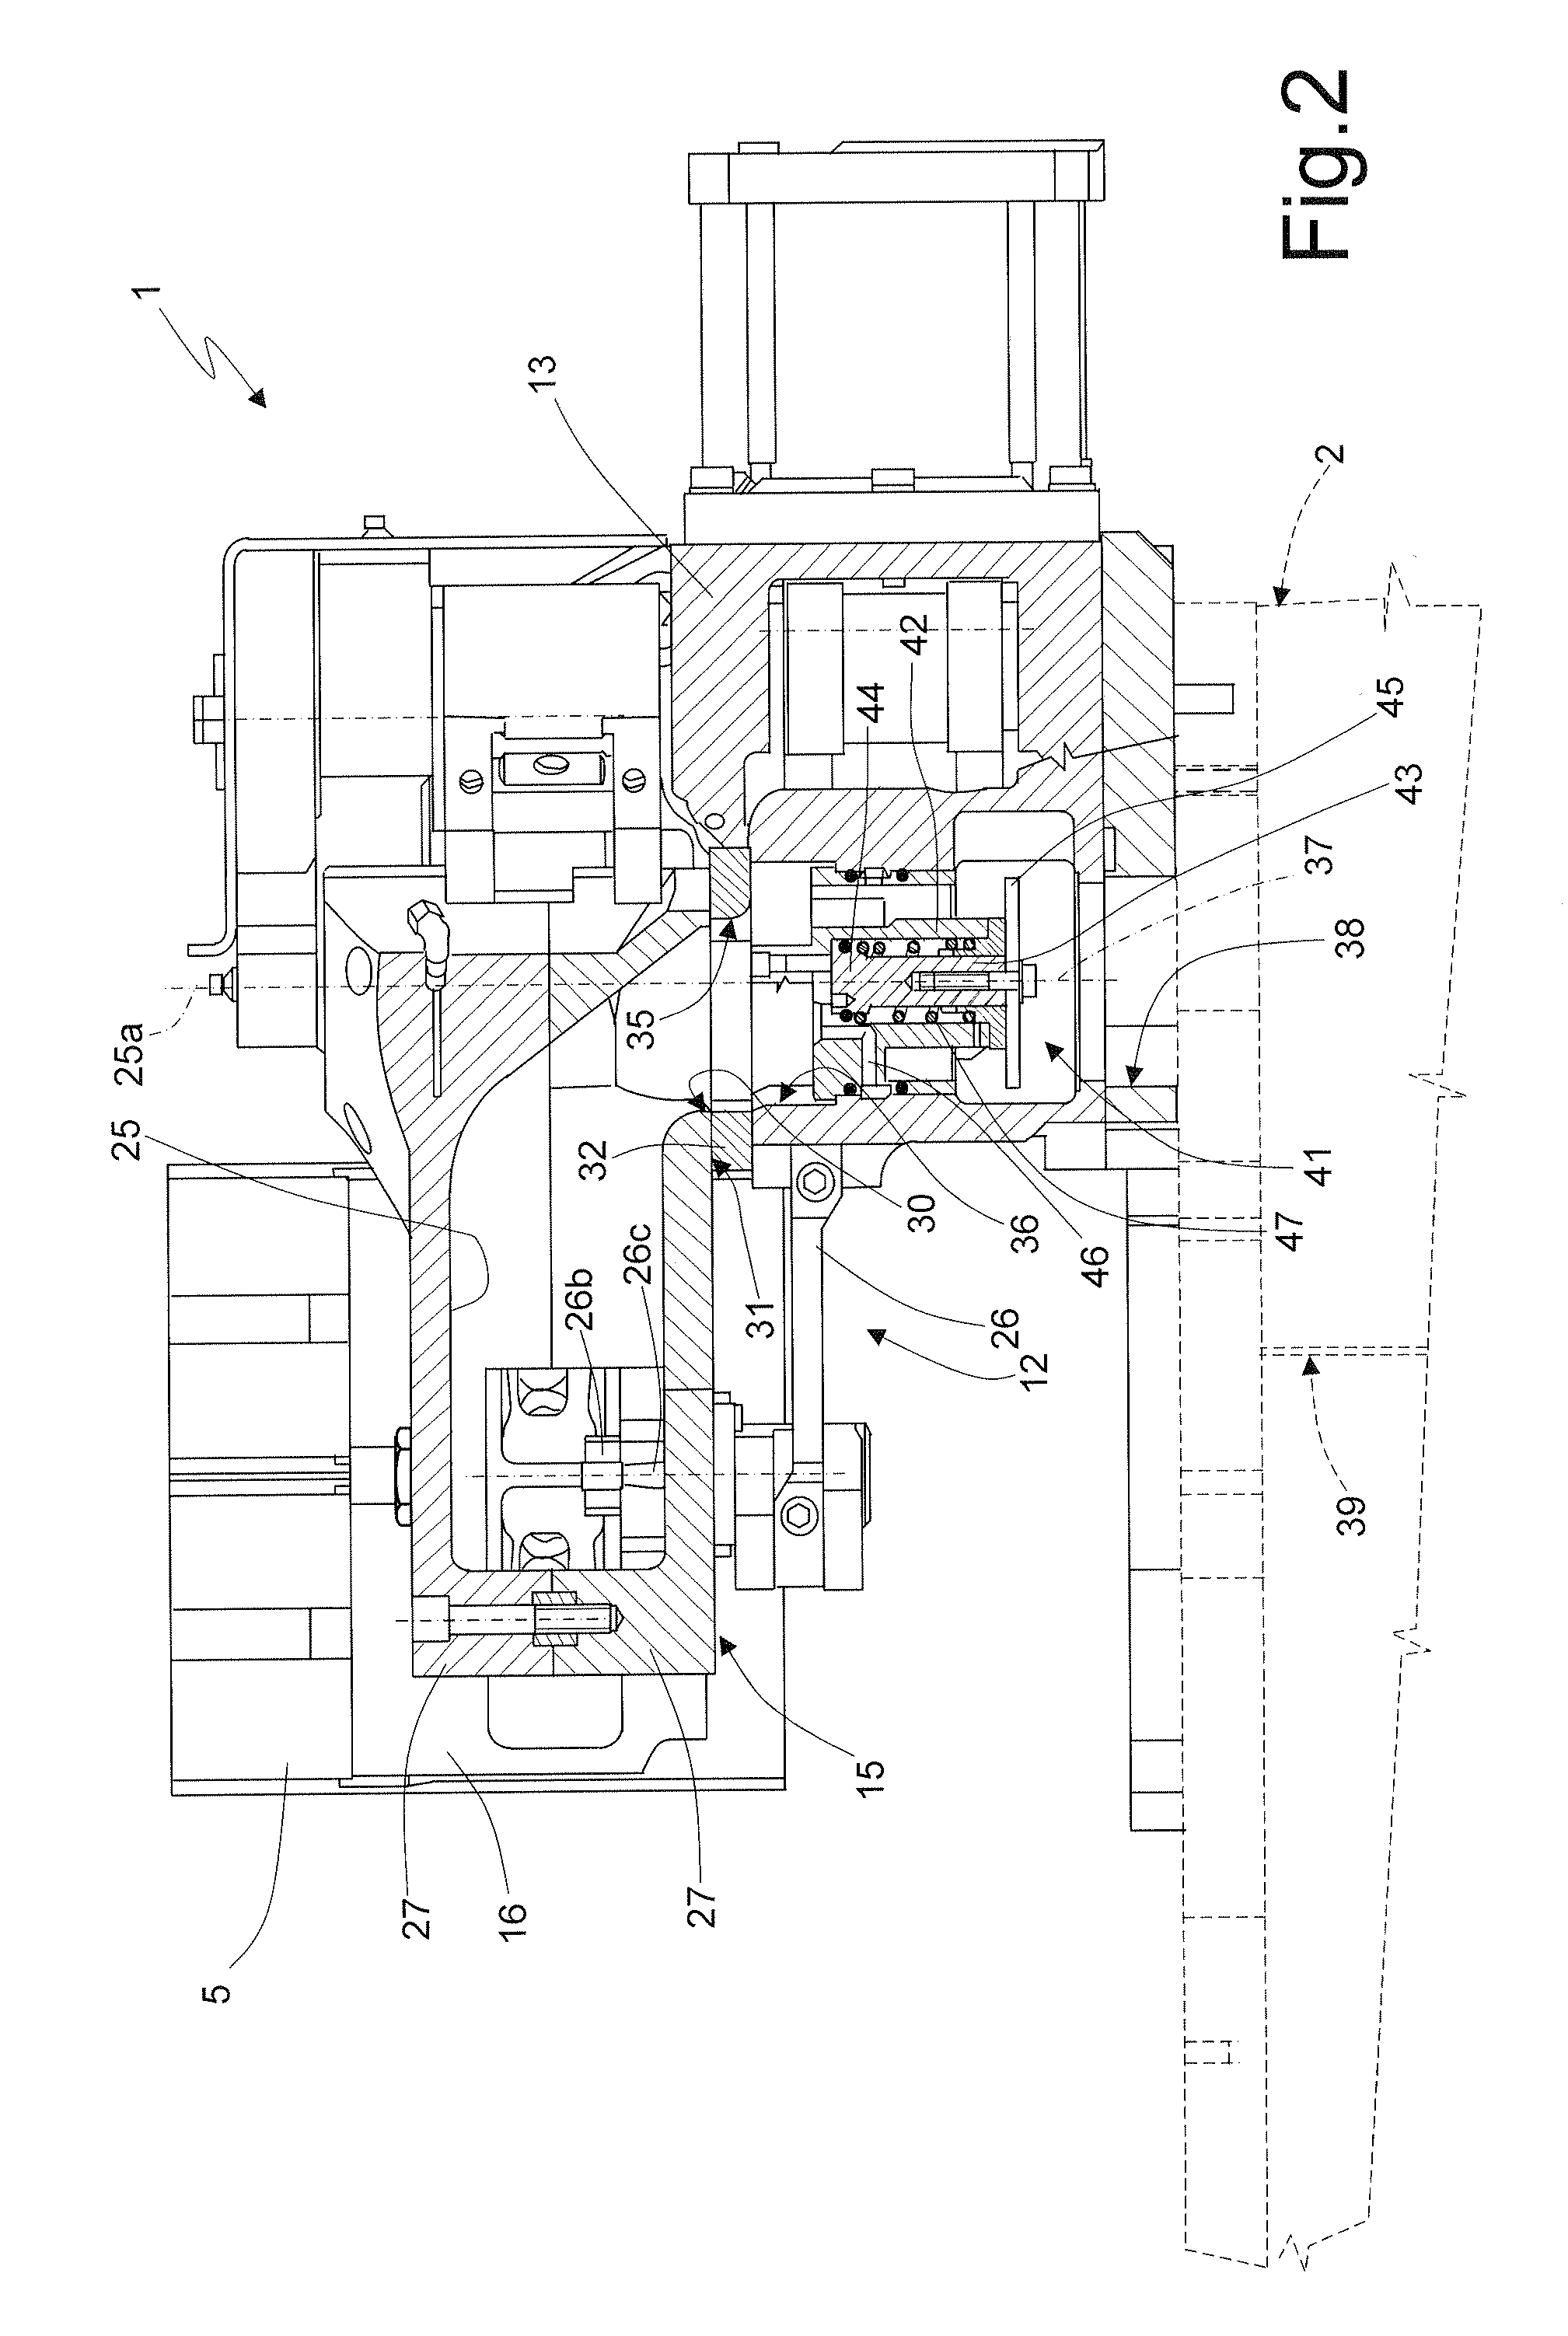 Mold actuating and cooling assembly for a glassware molding machine